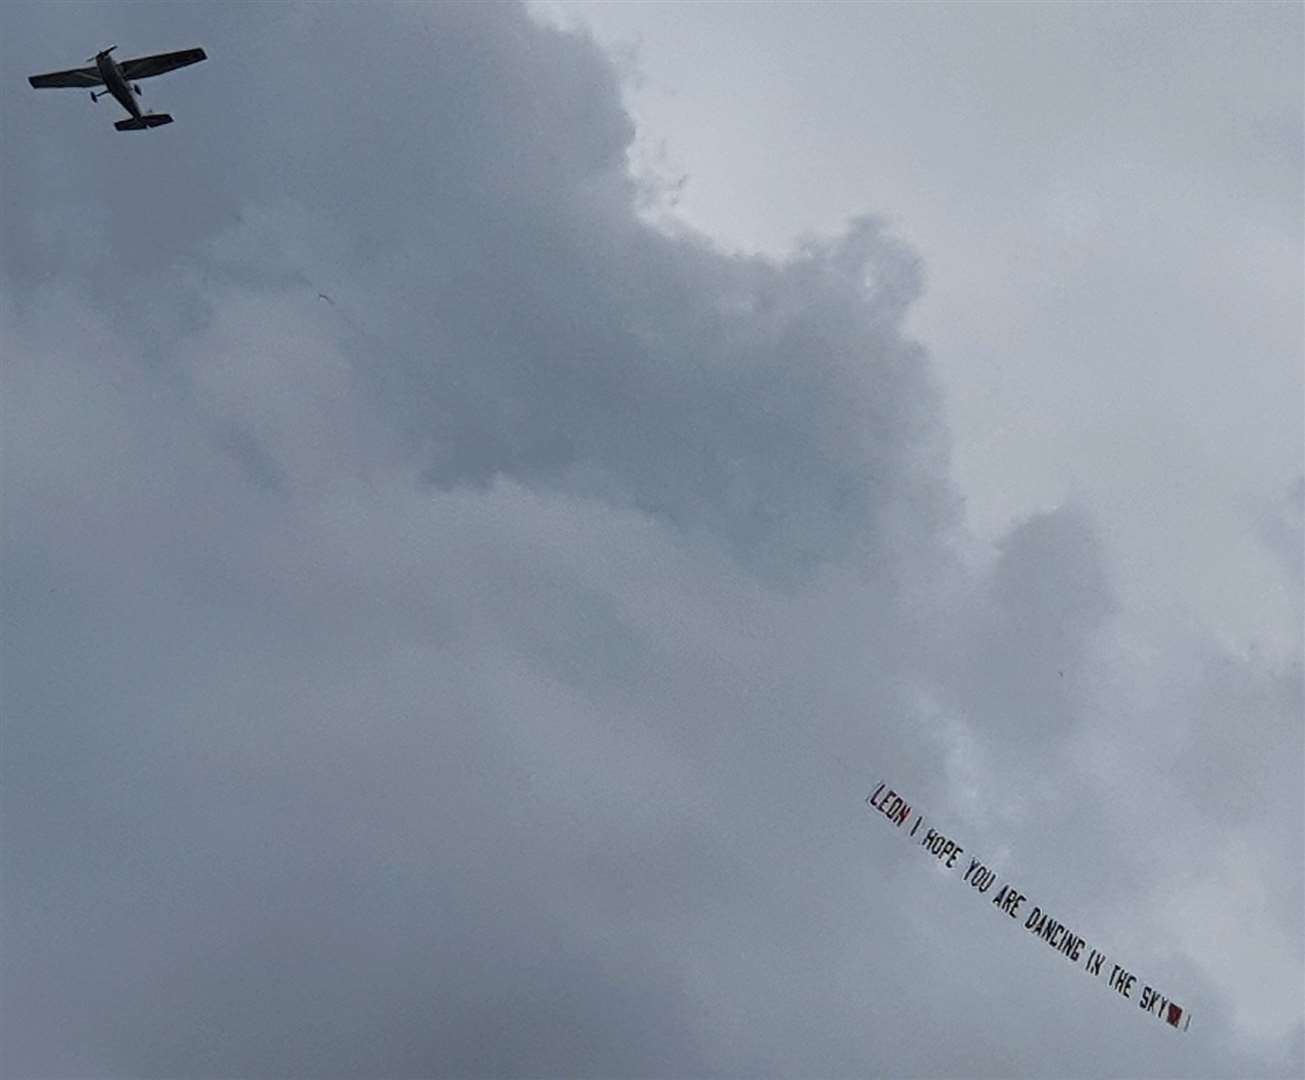 A plane paid tribute to Leon Junior on the day of his funeral in June